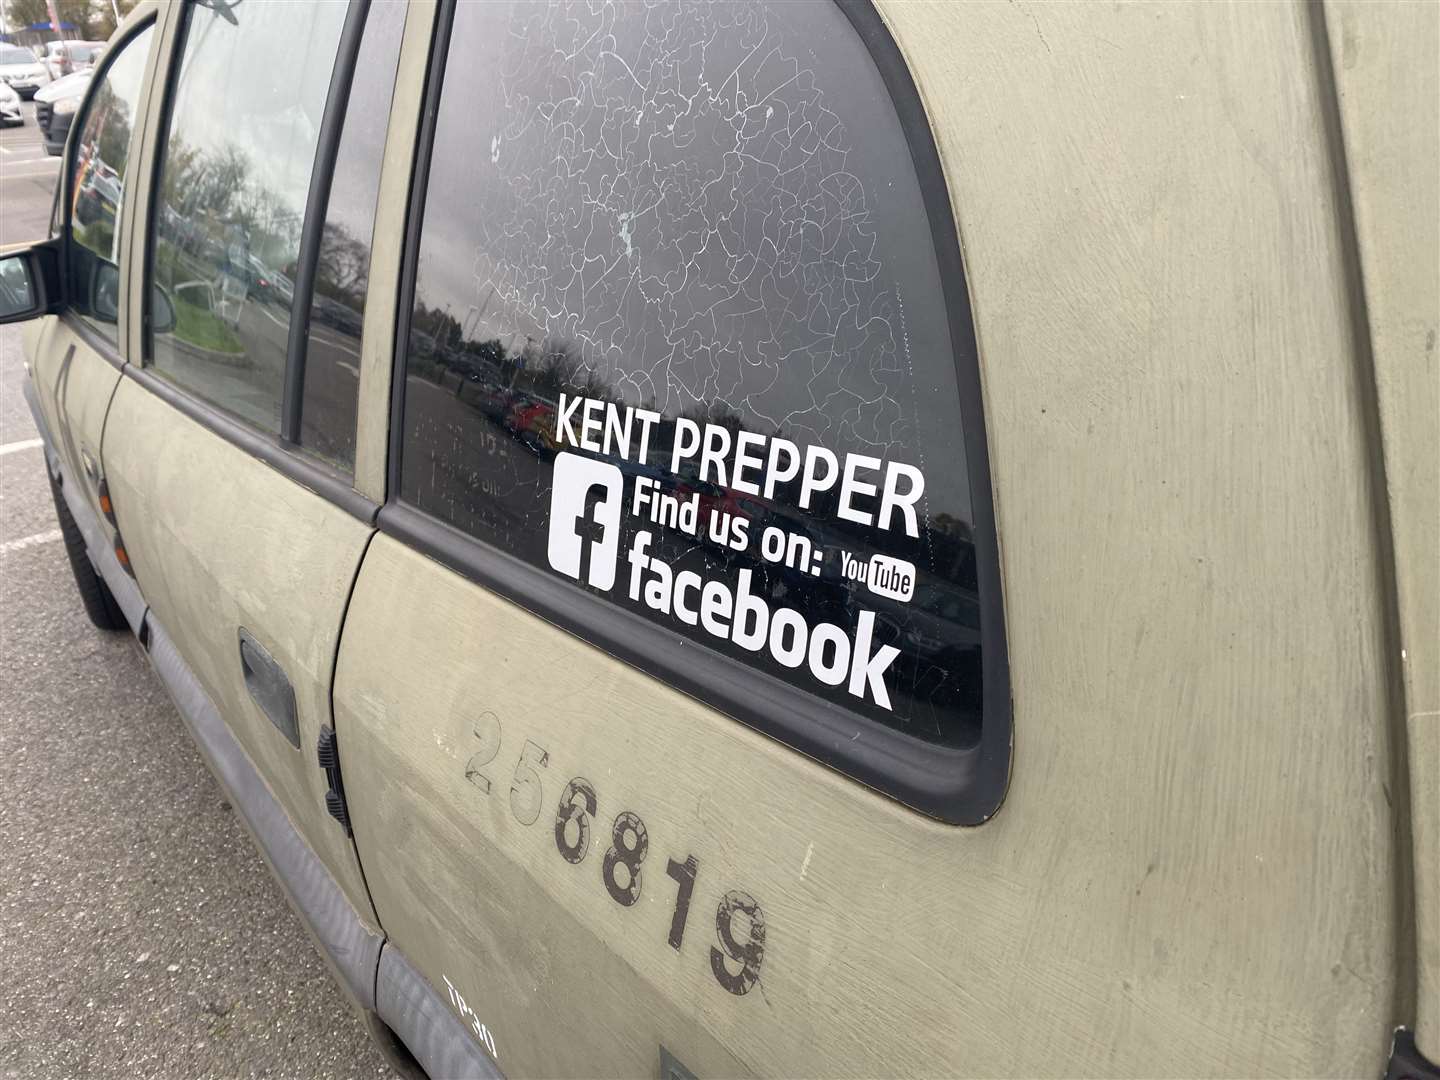 Cherva is known as the Kent Prepper online and runs both a Facebook page and YouTube channel